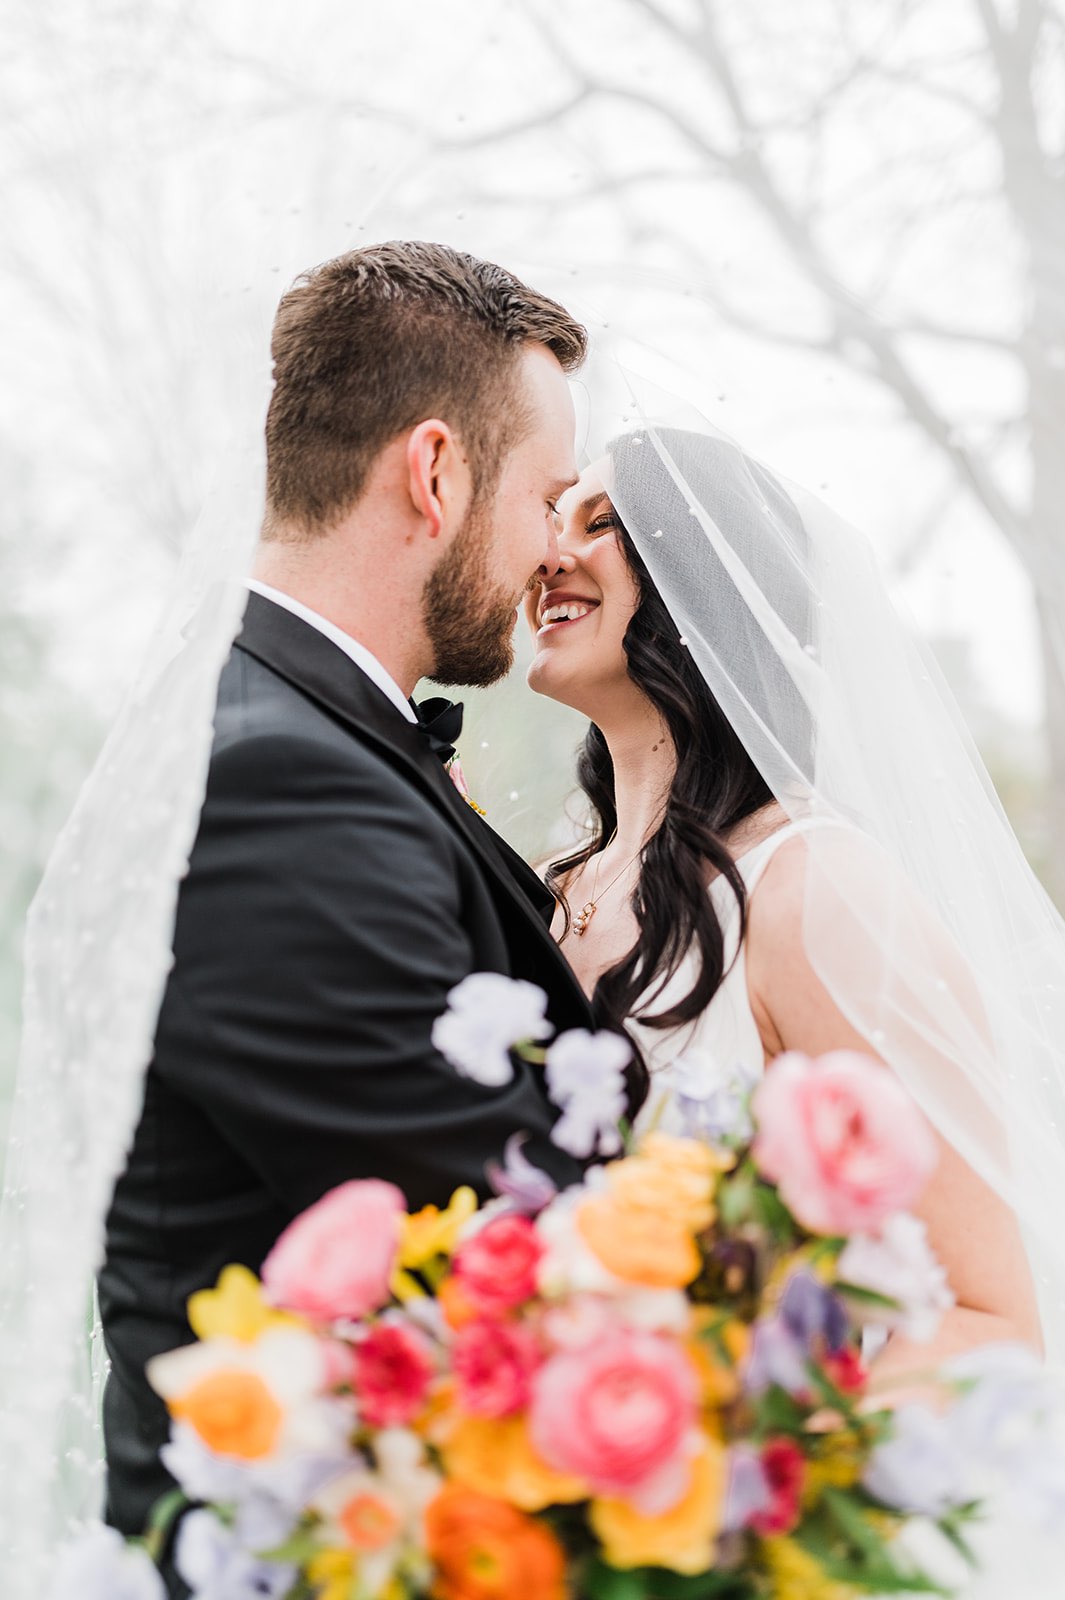 Newlyweds under the veil with colorful bridal bouquet